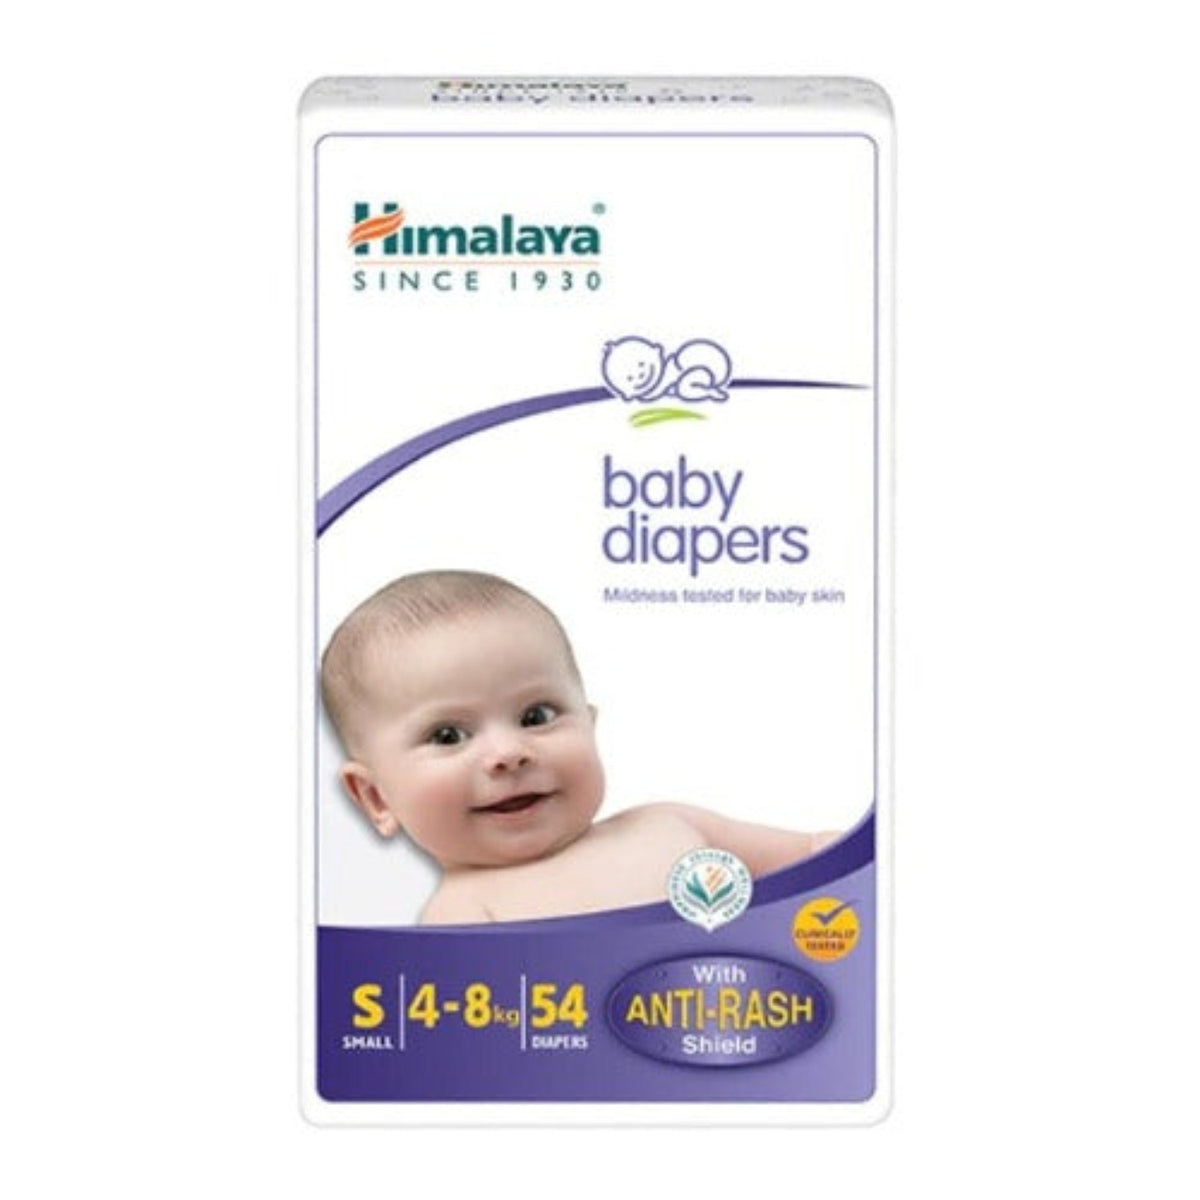 Himalaya Herbal Ayurvedic Baby Care Diapers The Bottom Line On Diapers